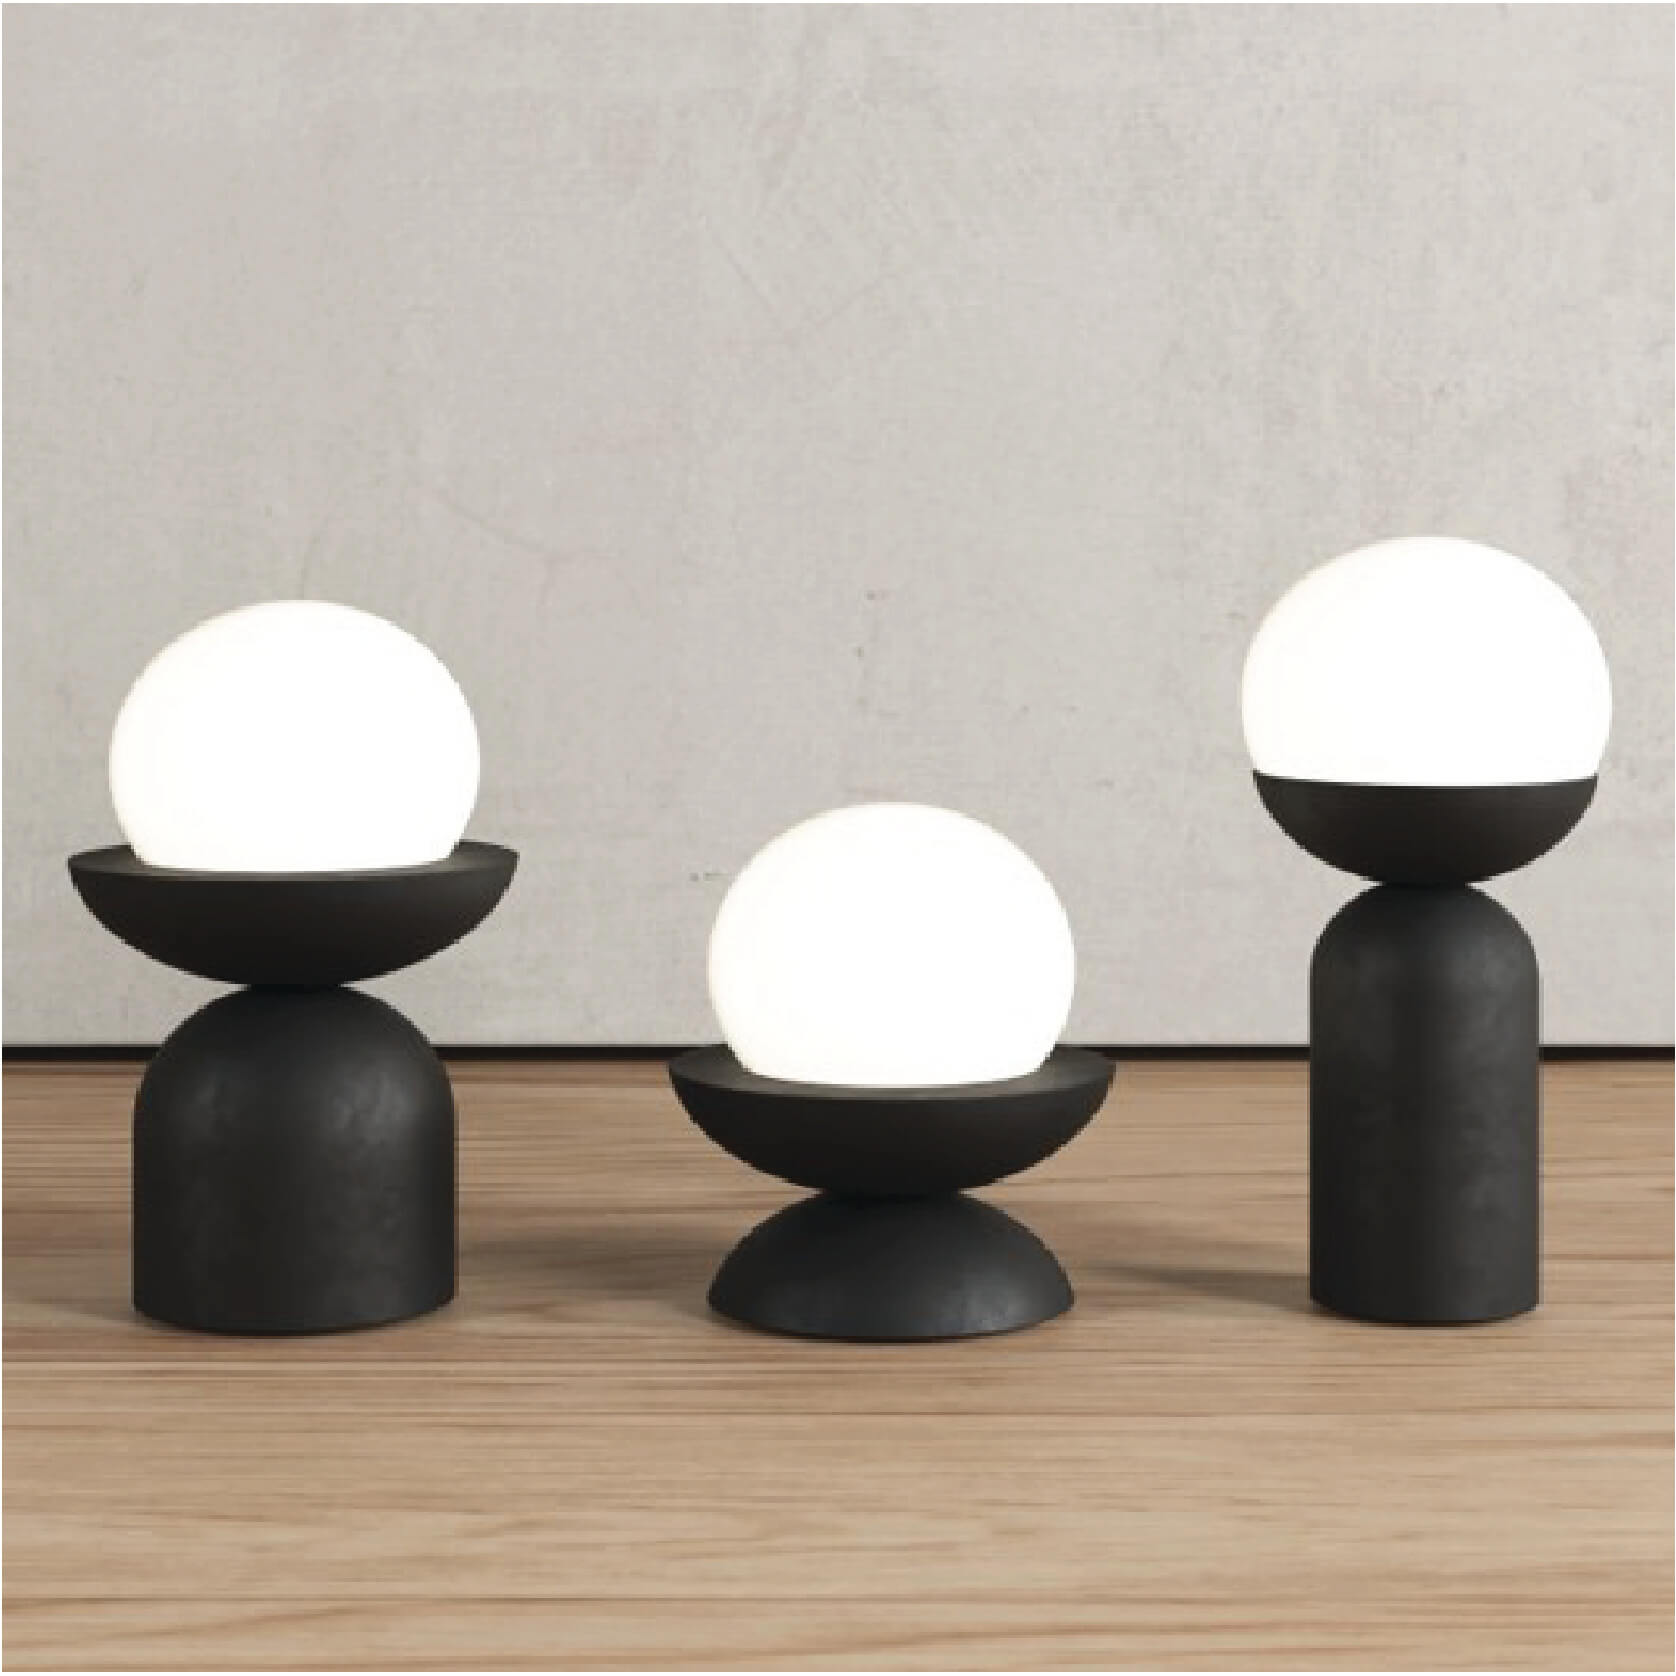 TABLE LAMP by Casa Selma - Design Commune Feature